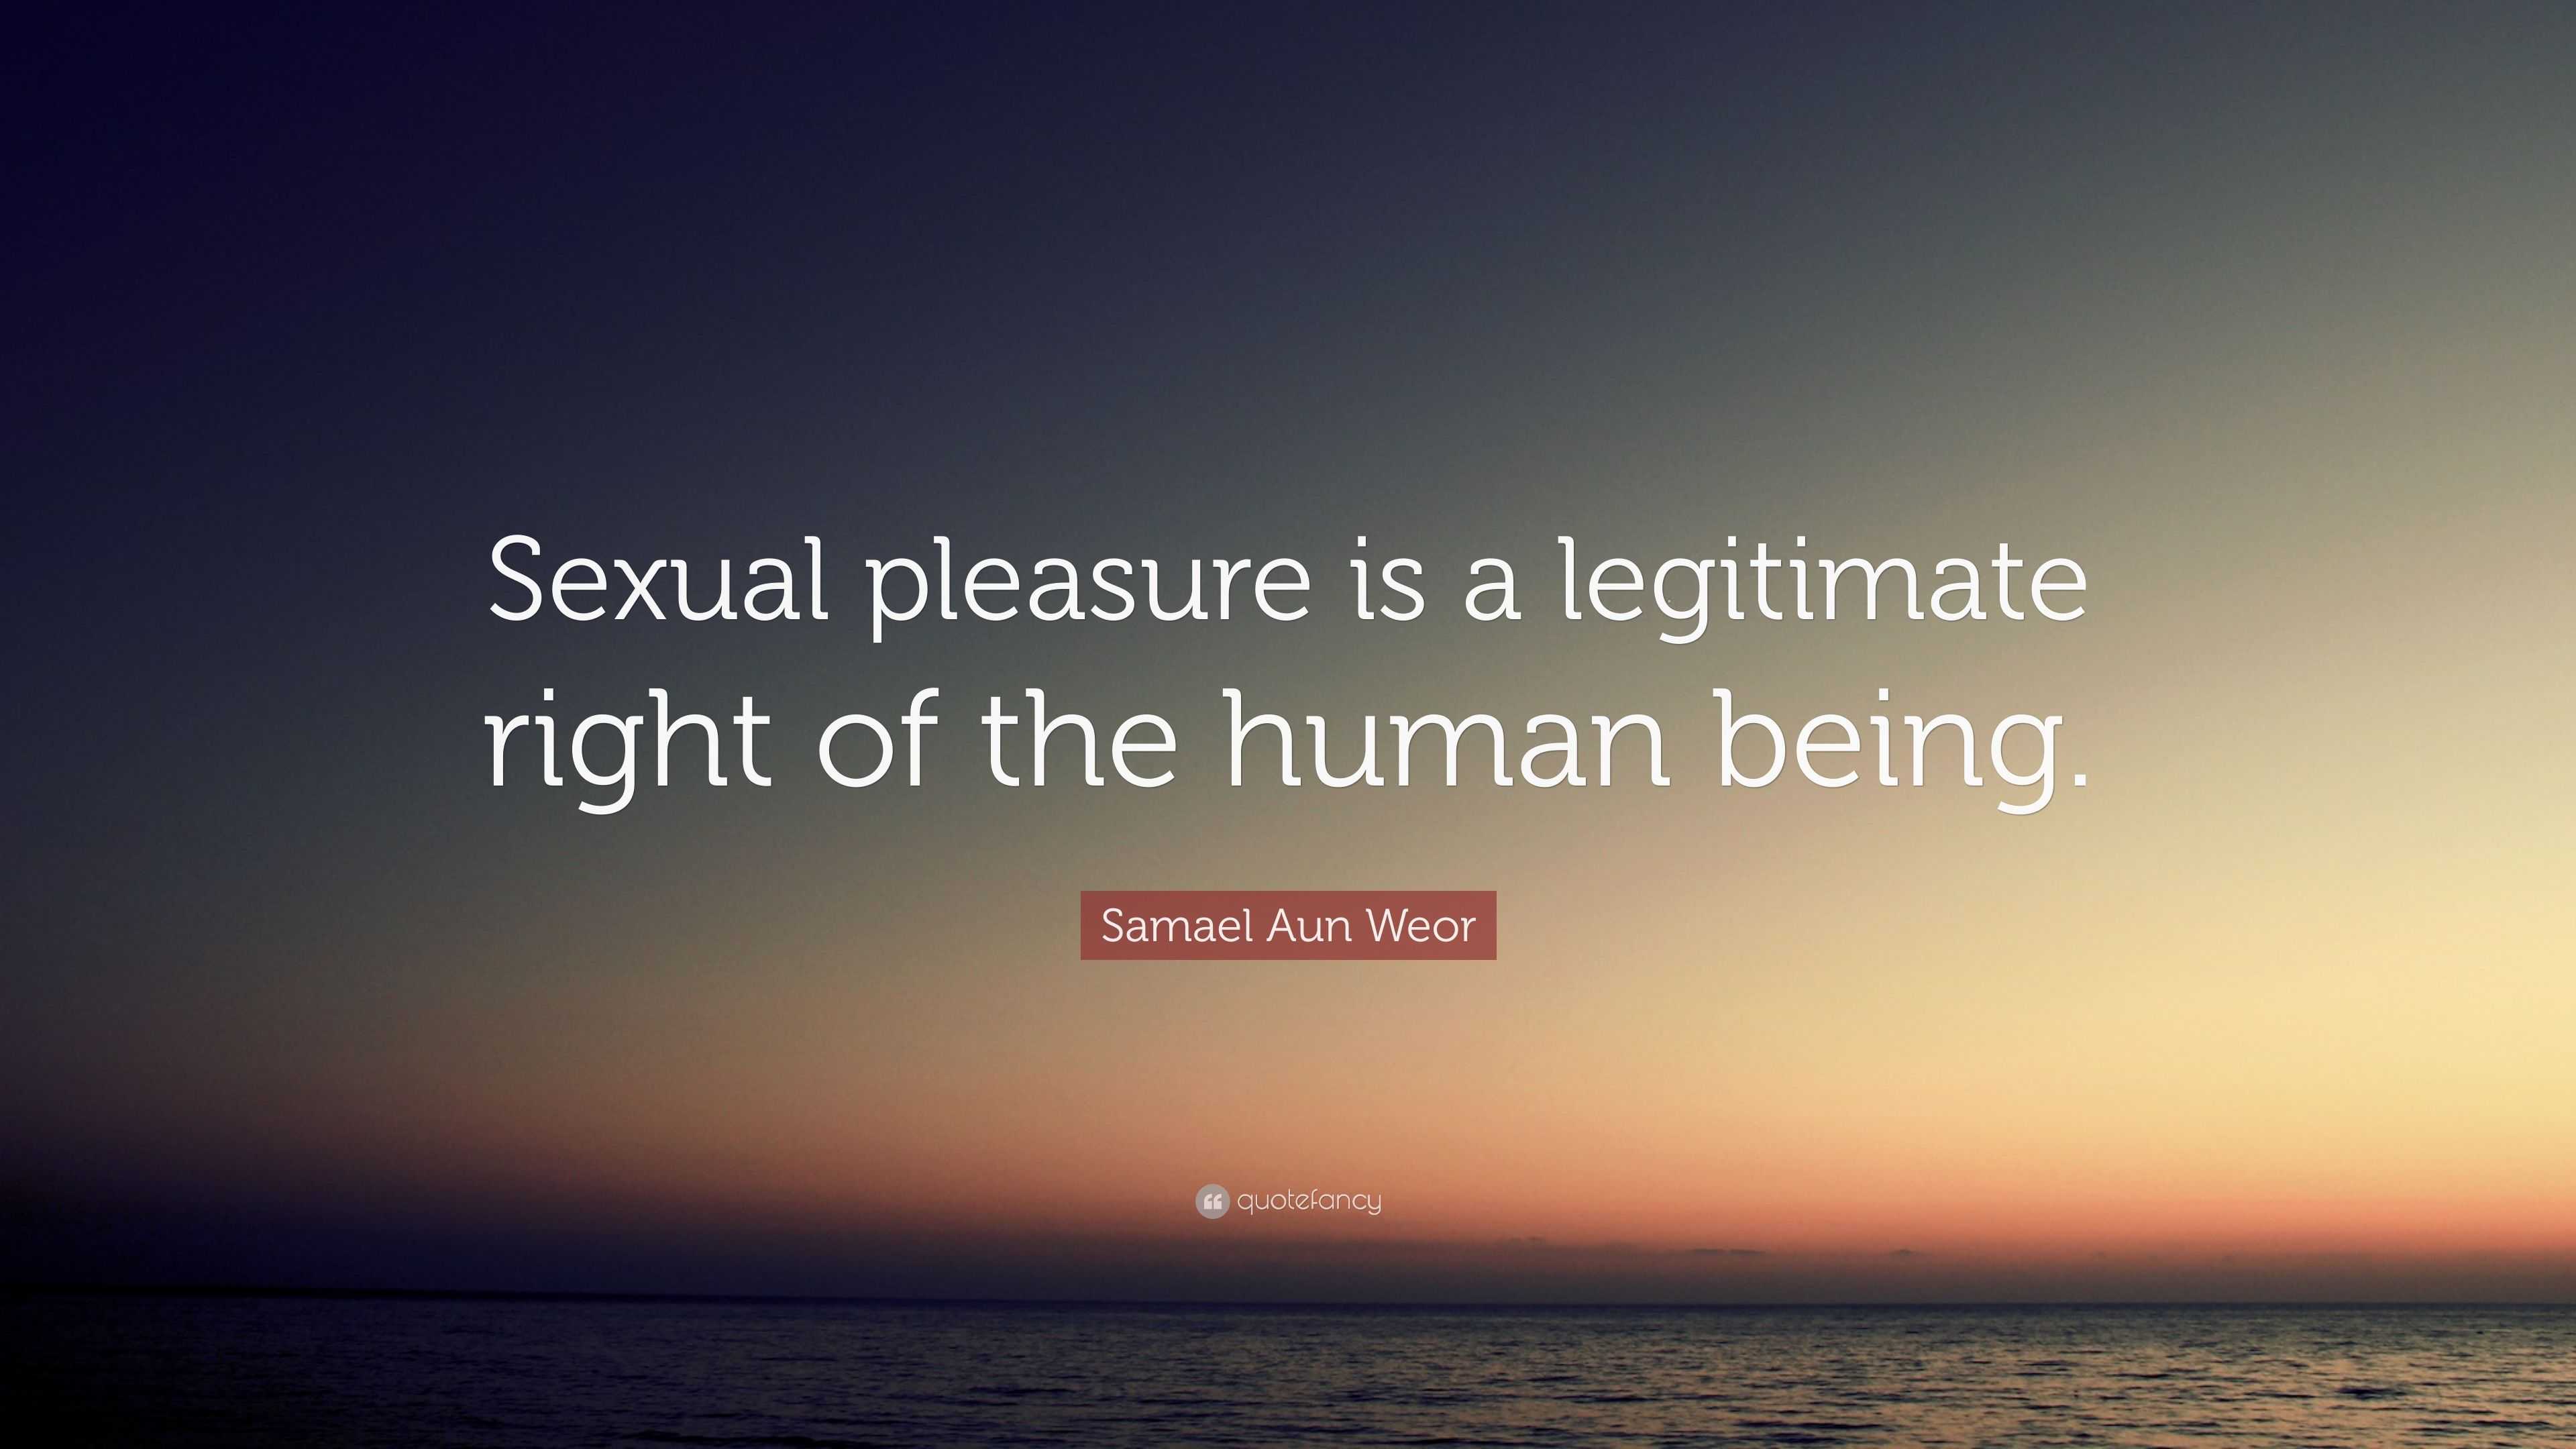 Self-pleasure is a human right too.